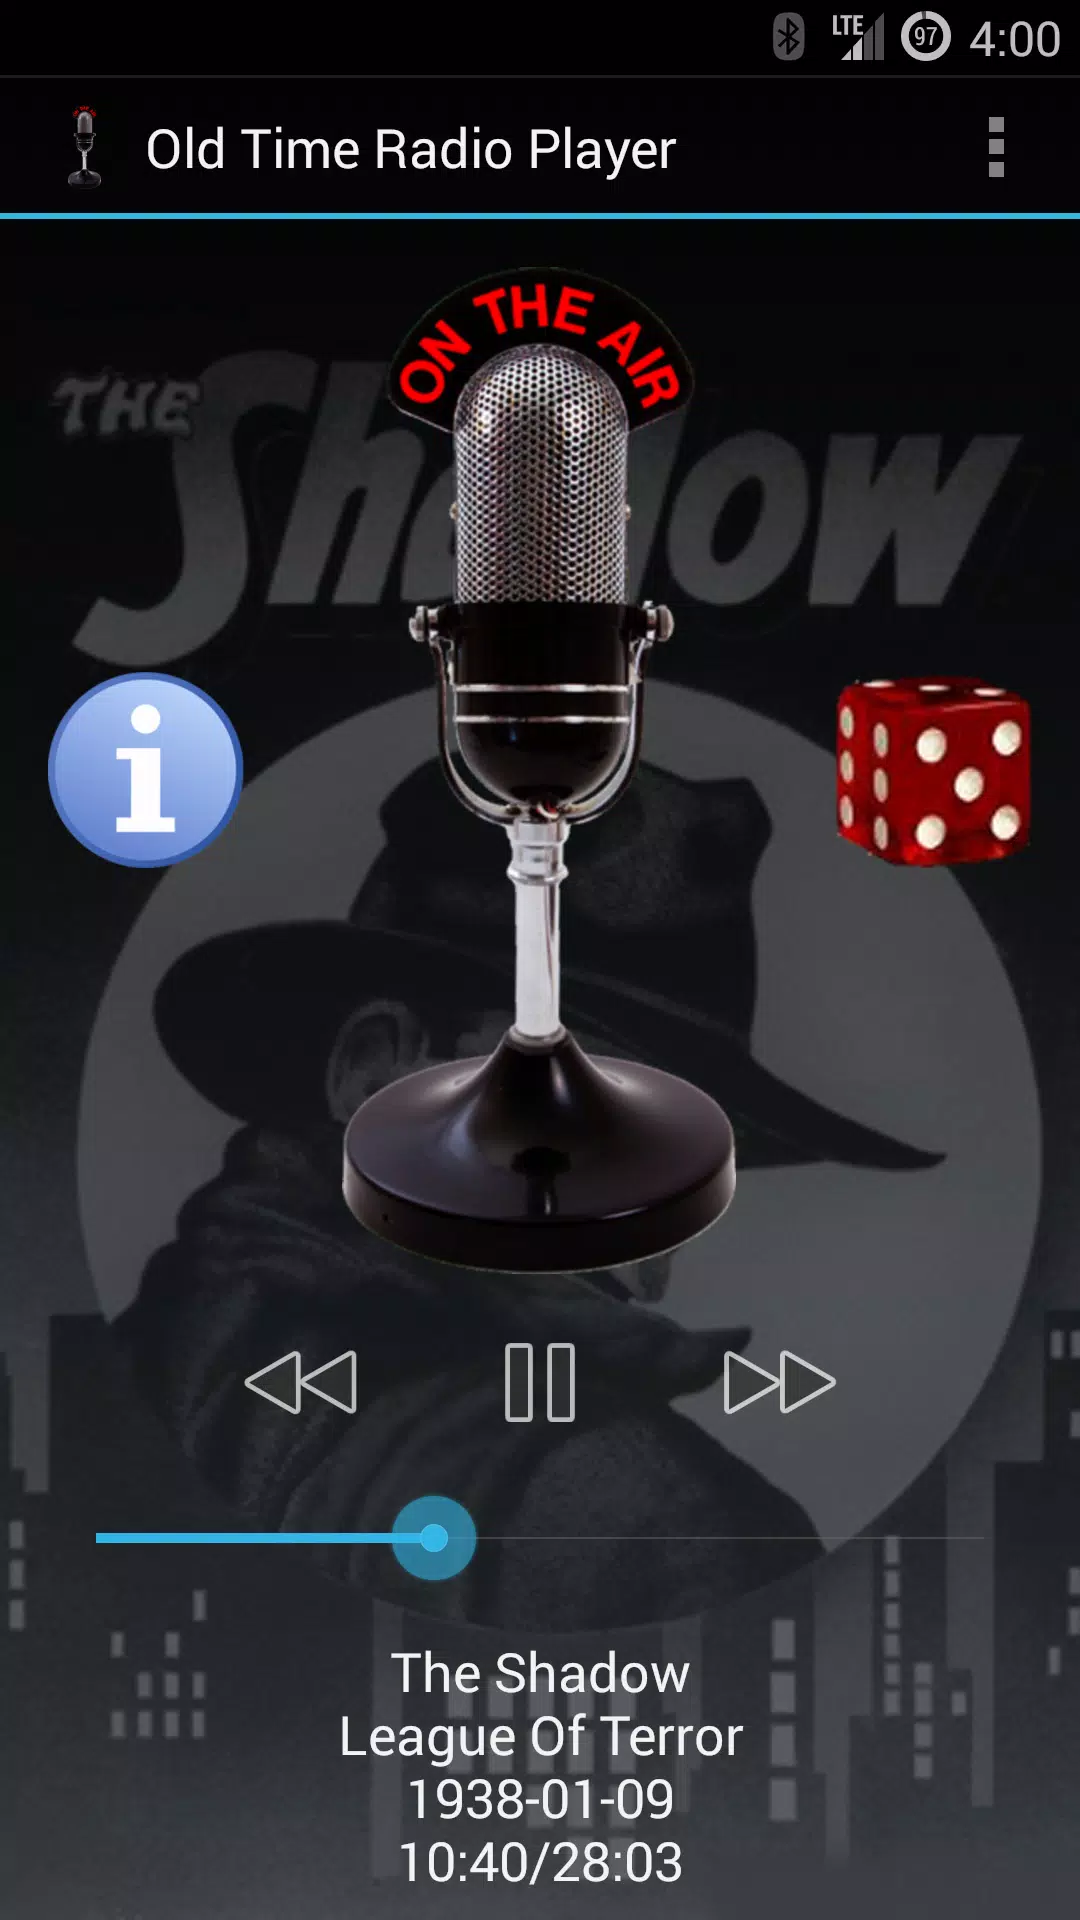 Old Time Radio Player for Android - APK Download